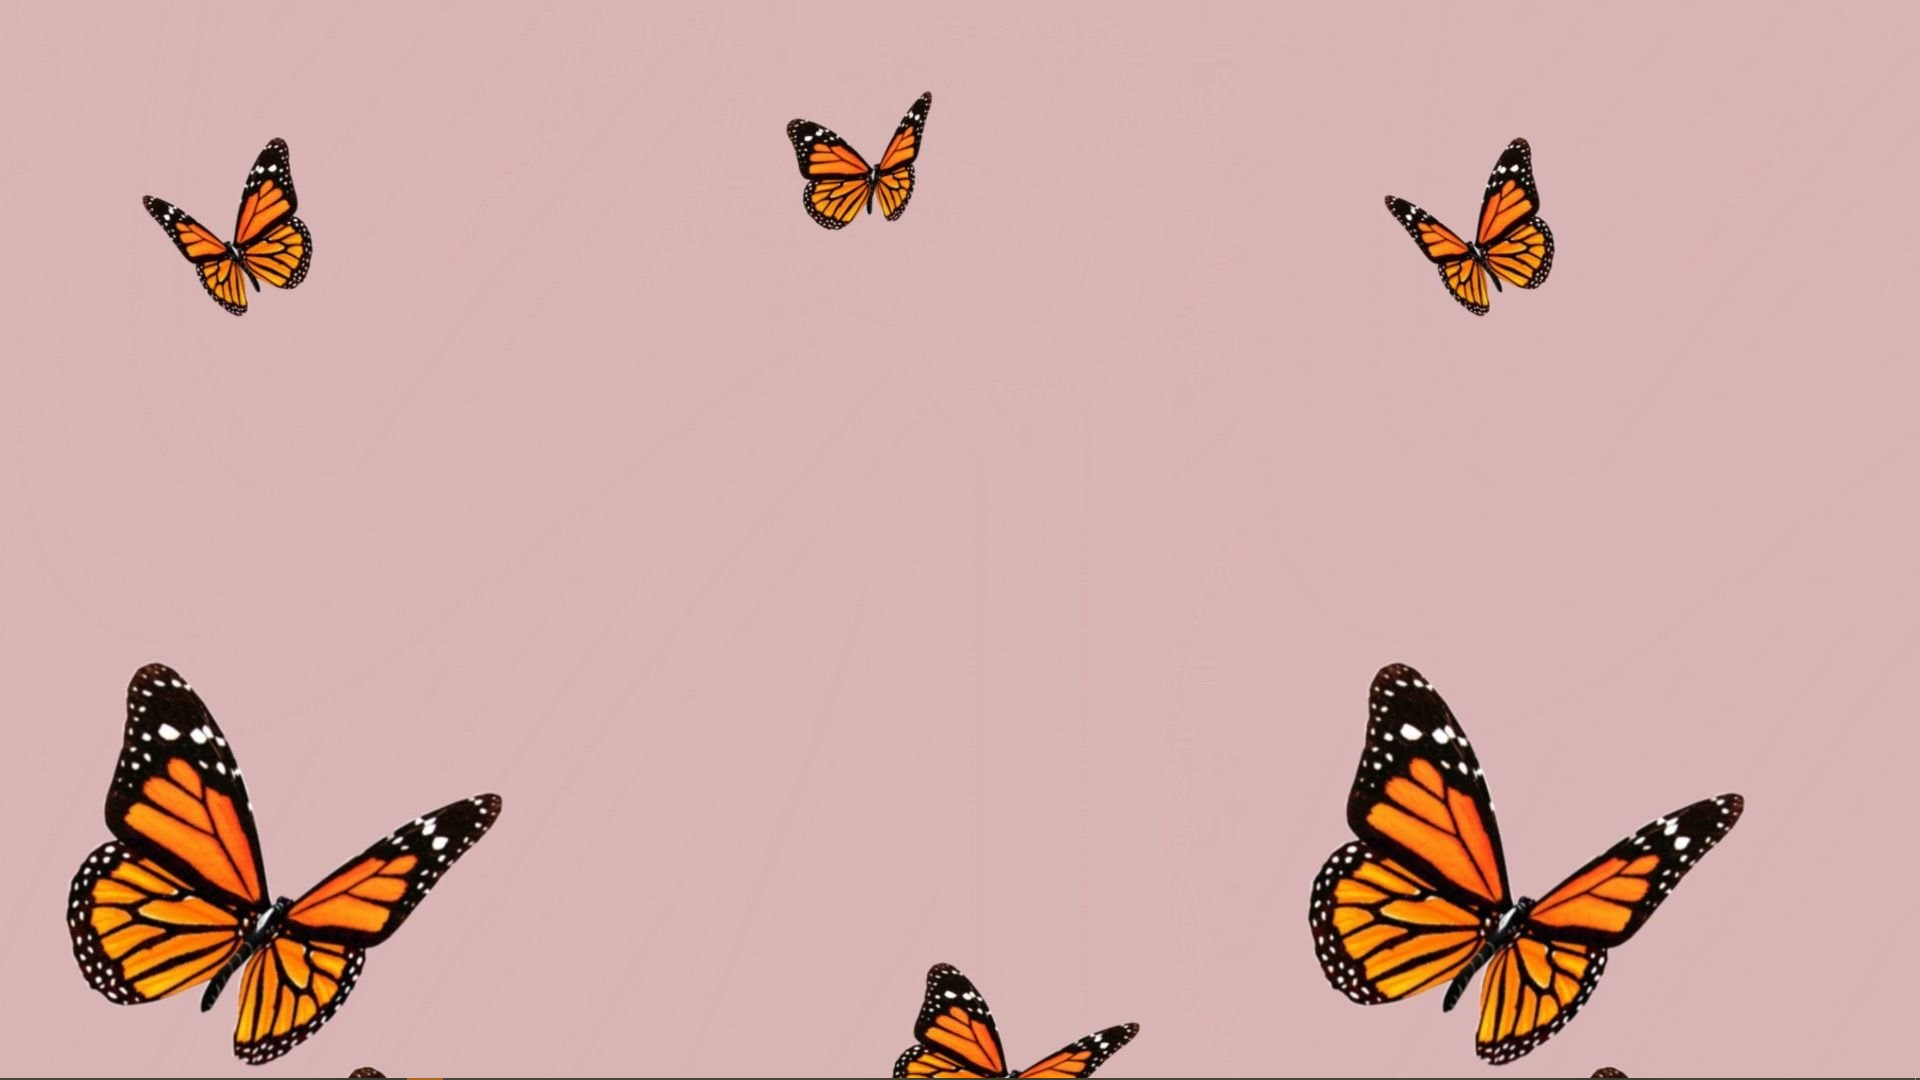 Butterfly Wallpaper For Your Desktops Background Pictures Butterflies  Background Image And Wallpaper for Free Download